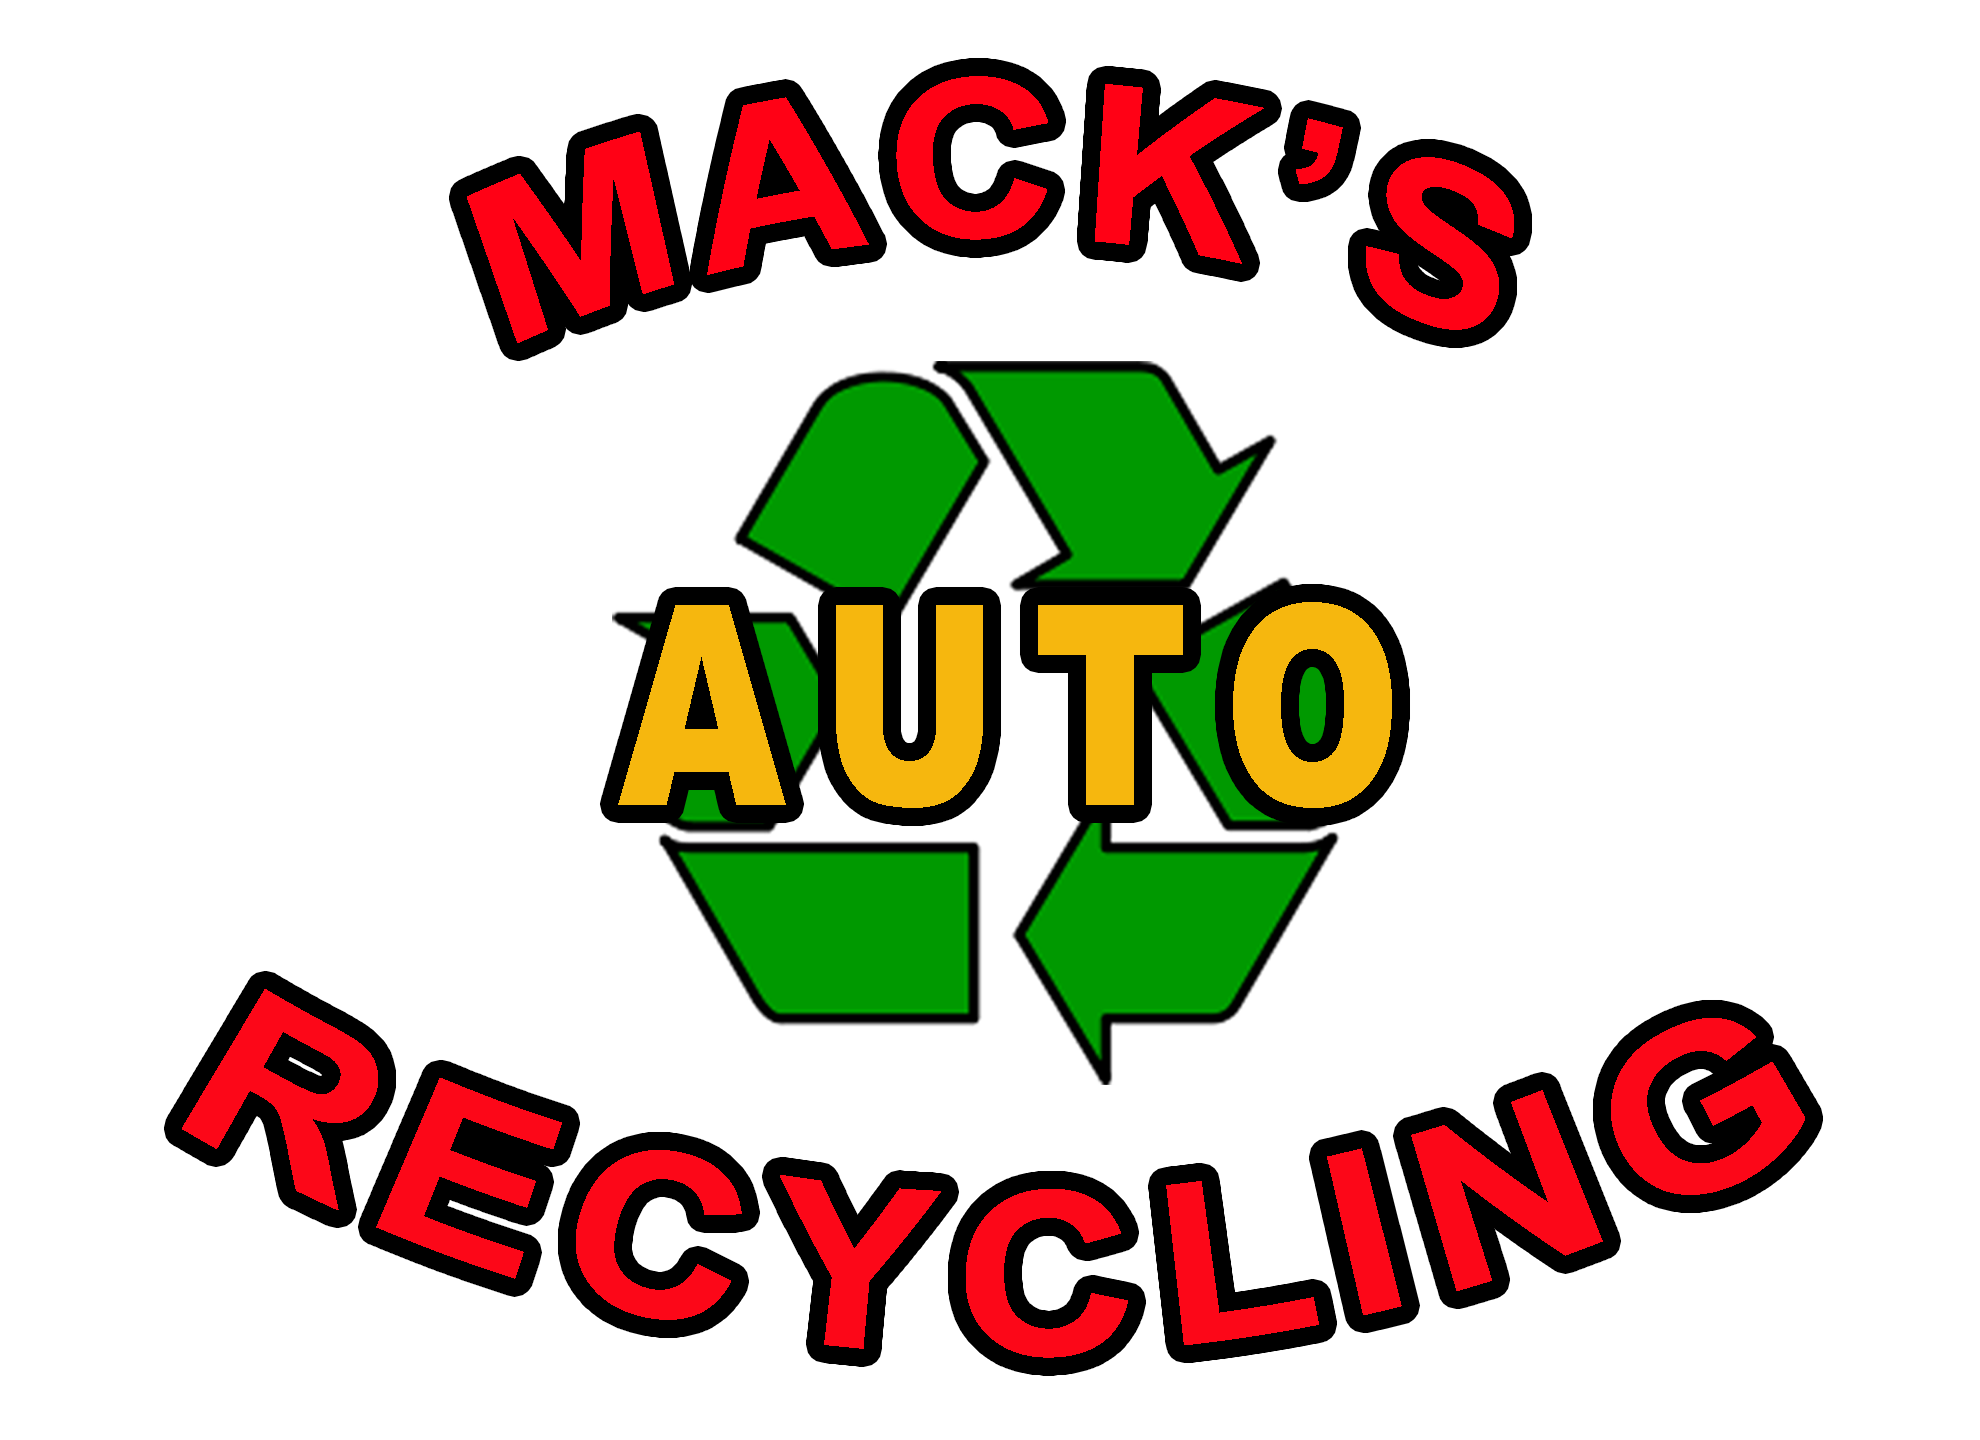 Mack's Recycling - Central Illinois' Recycling Headquarters